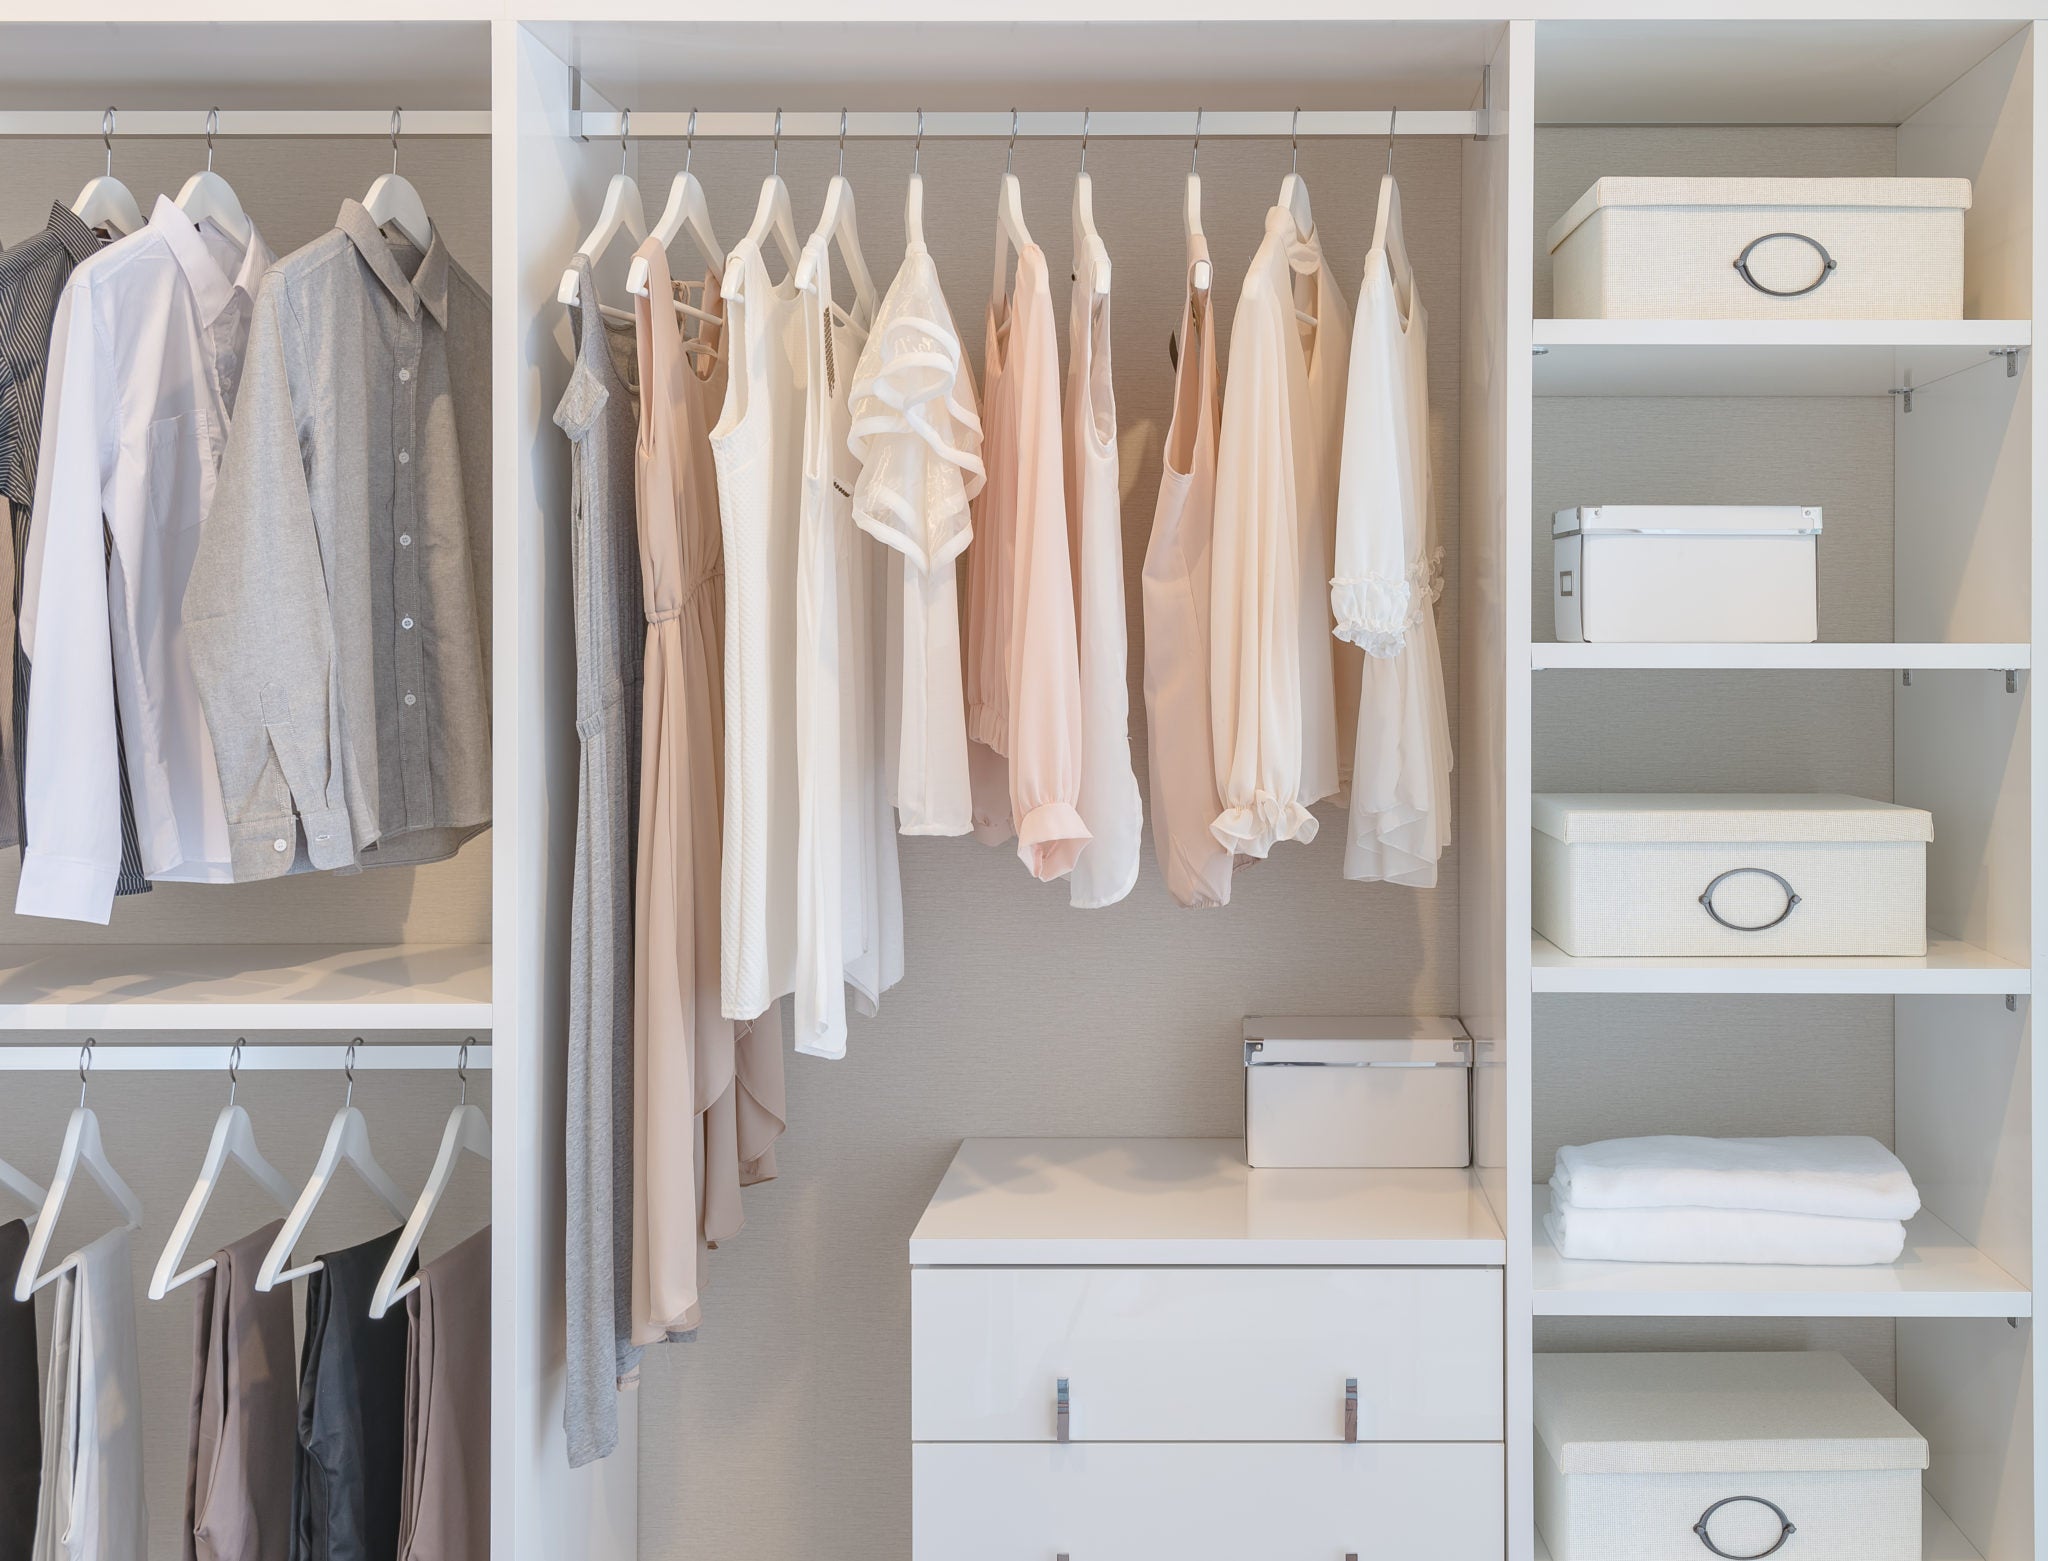 A Five-Step Guide to Organizing Your Closet